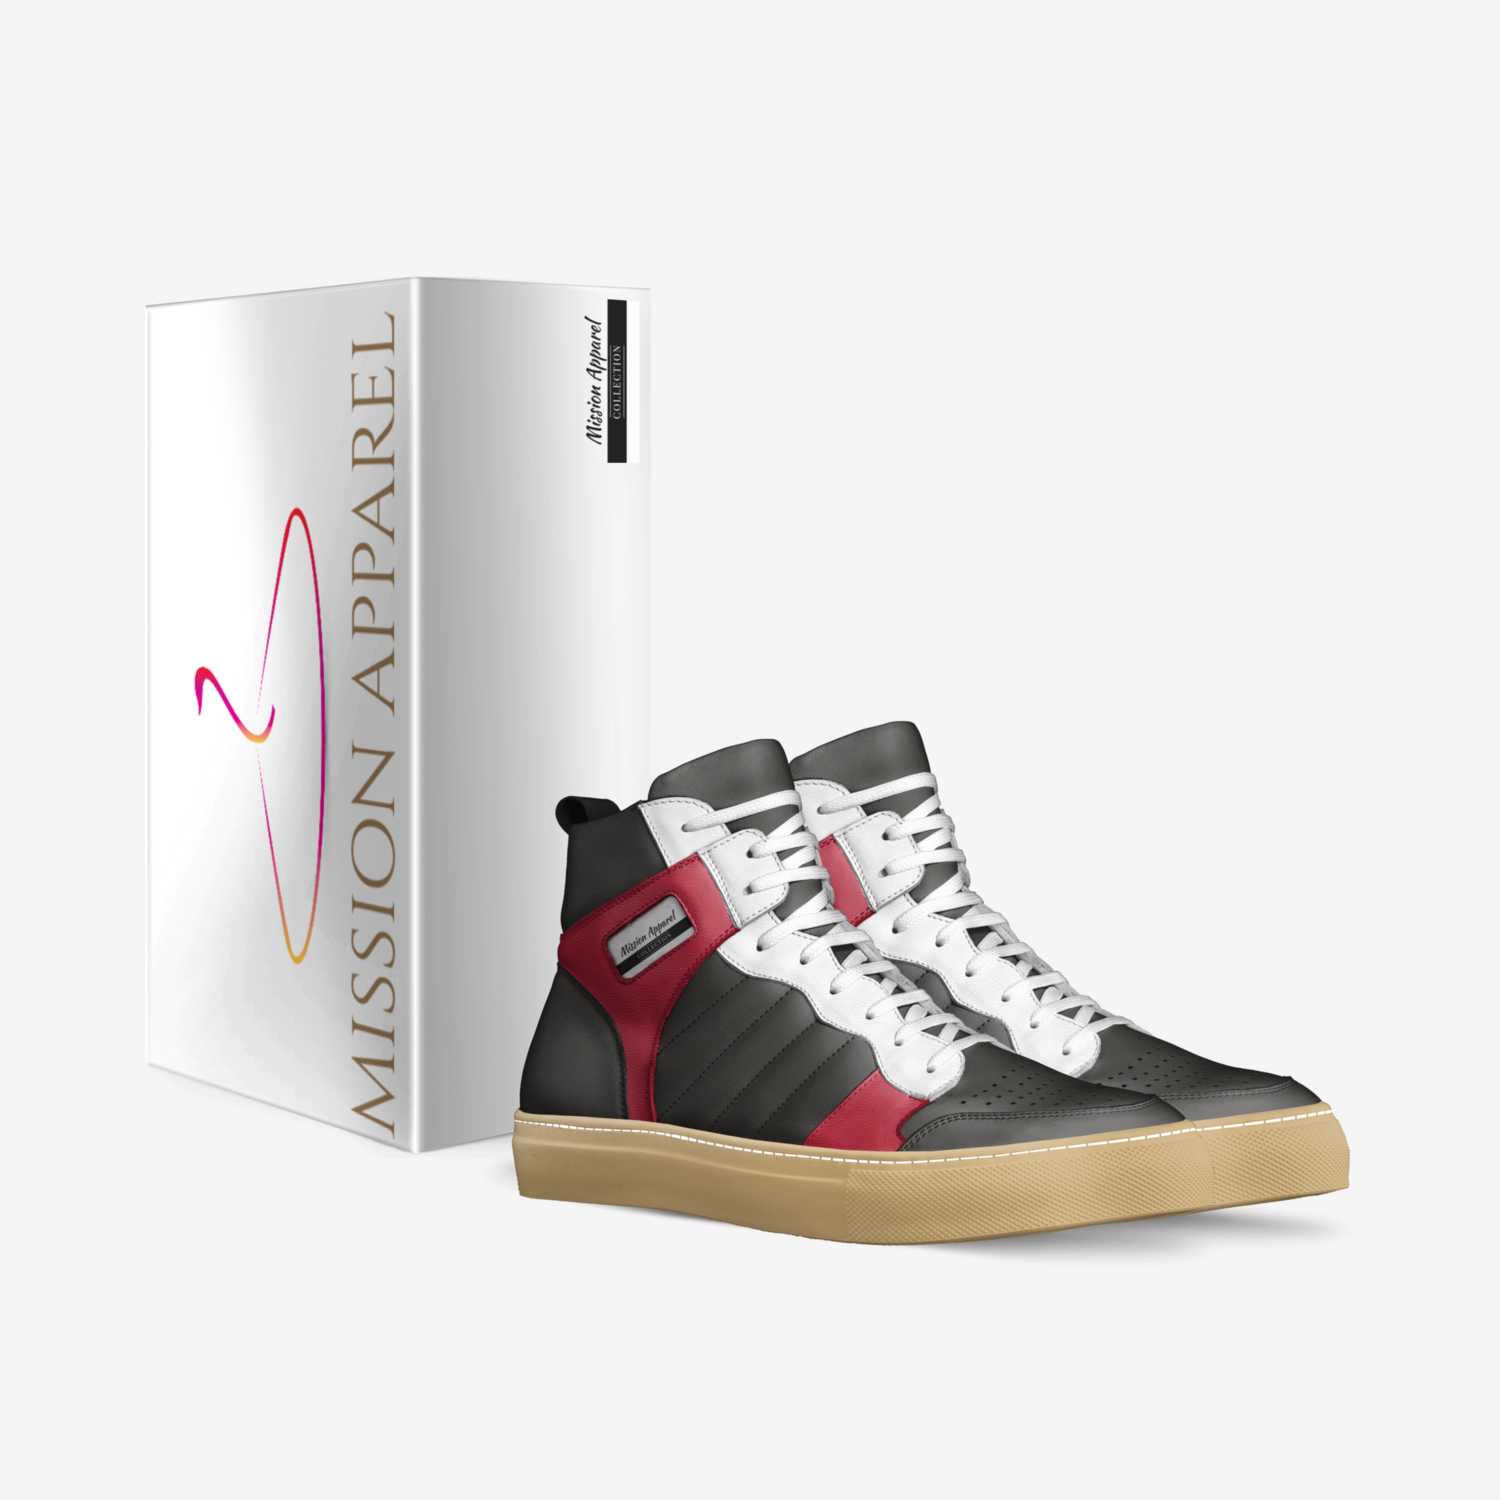 Mission Apparel  custom made in Italy shoes by Danielle Dixon | Box view